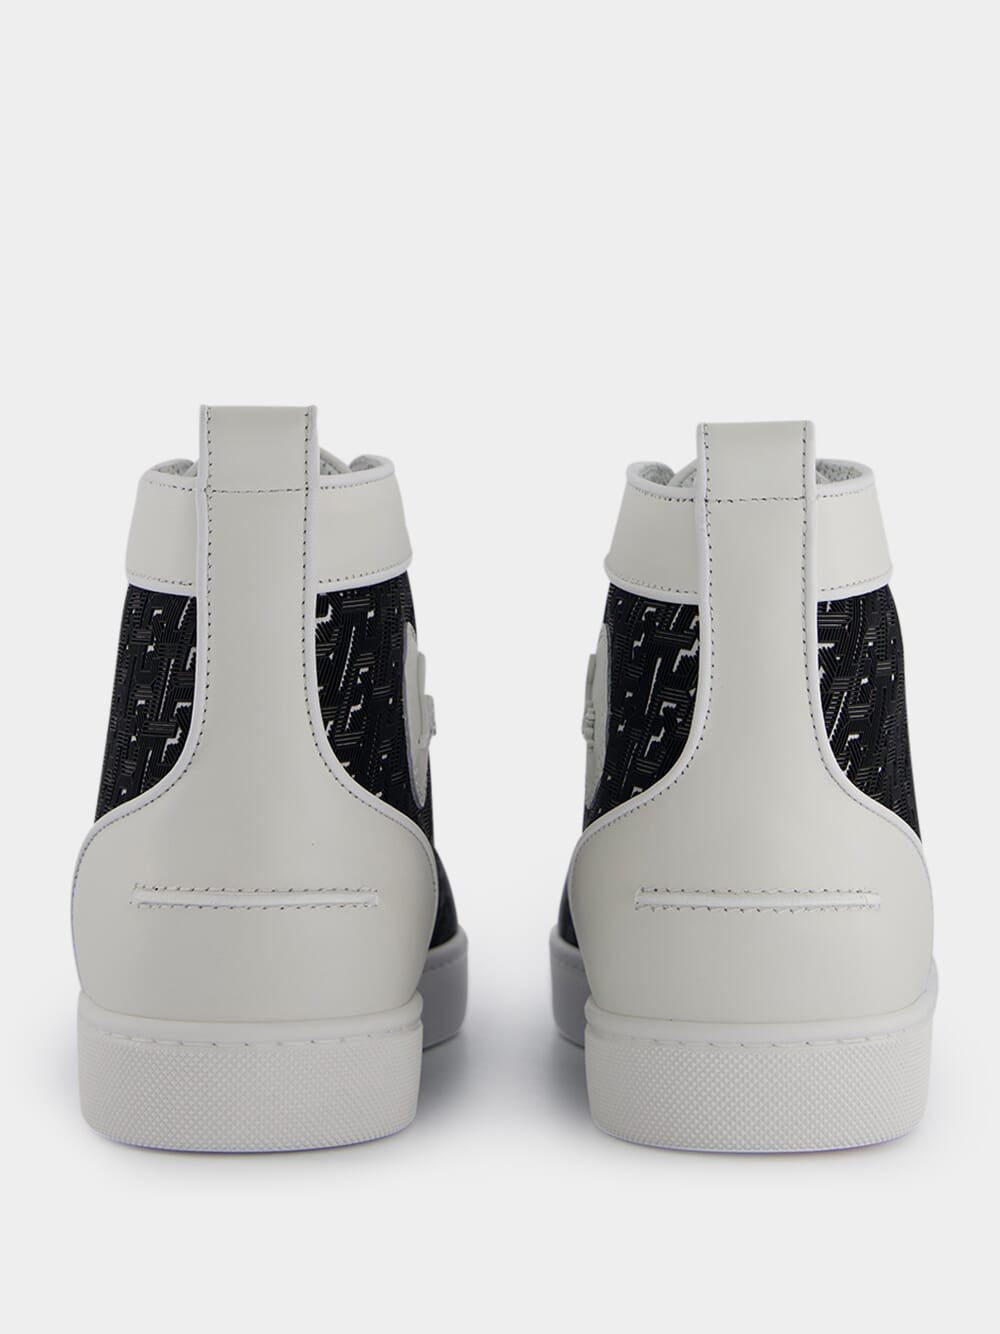 Christian LouboutinLouis High-Top Sneaker at Fashion Clinic